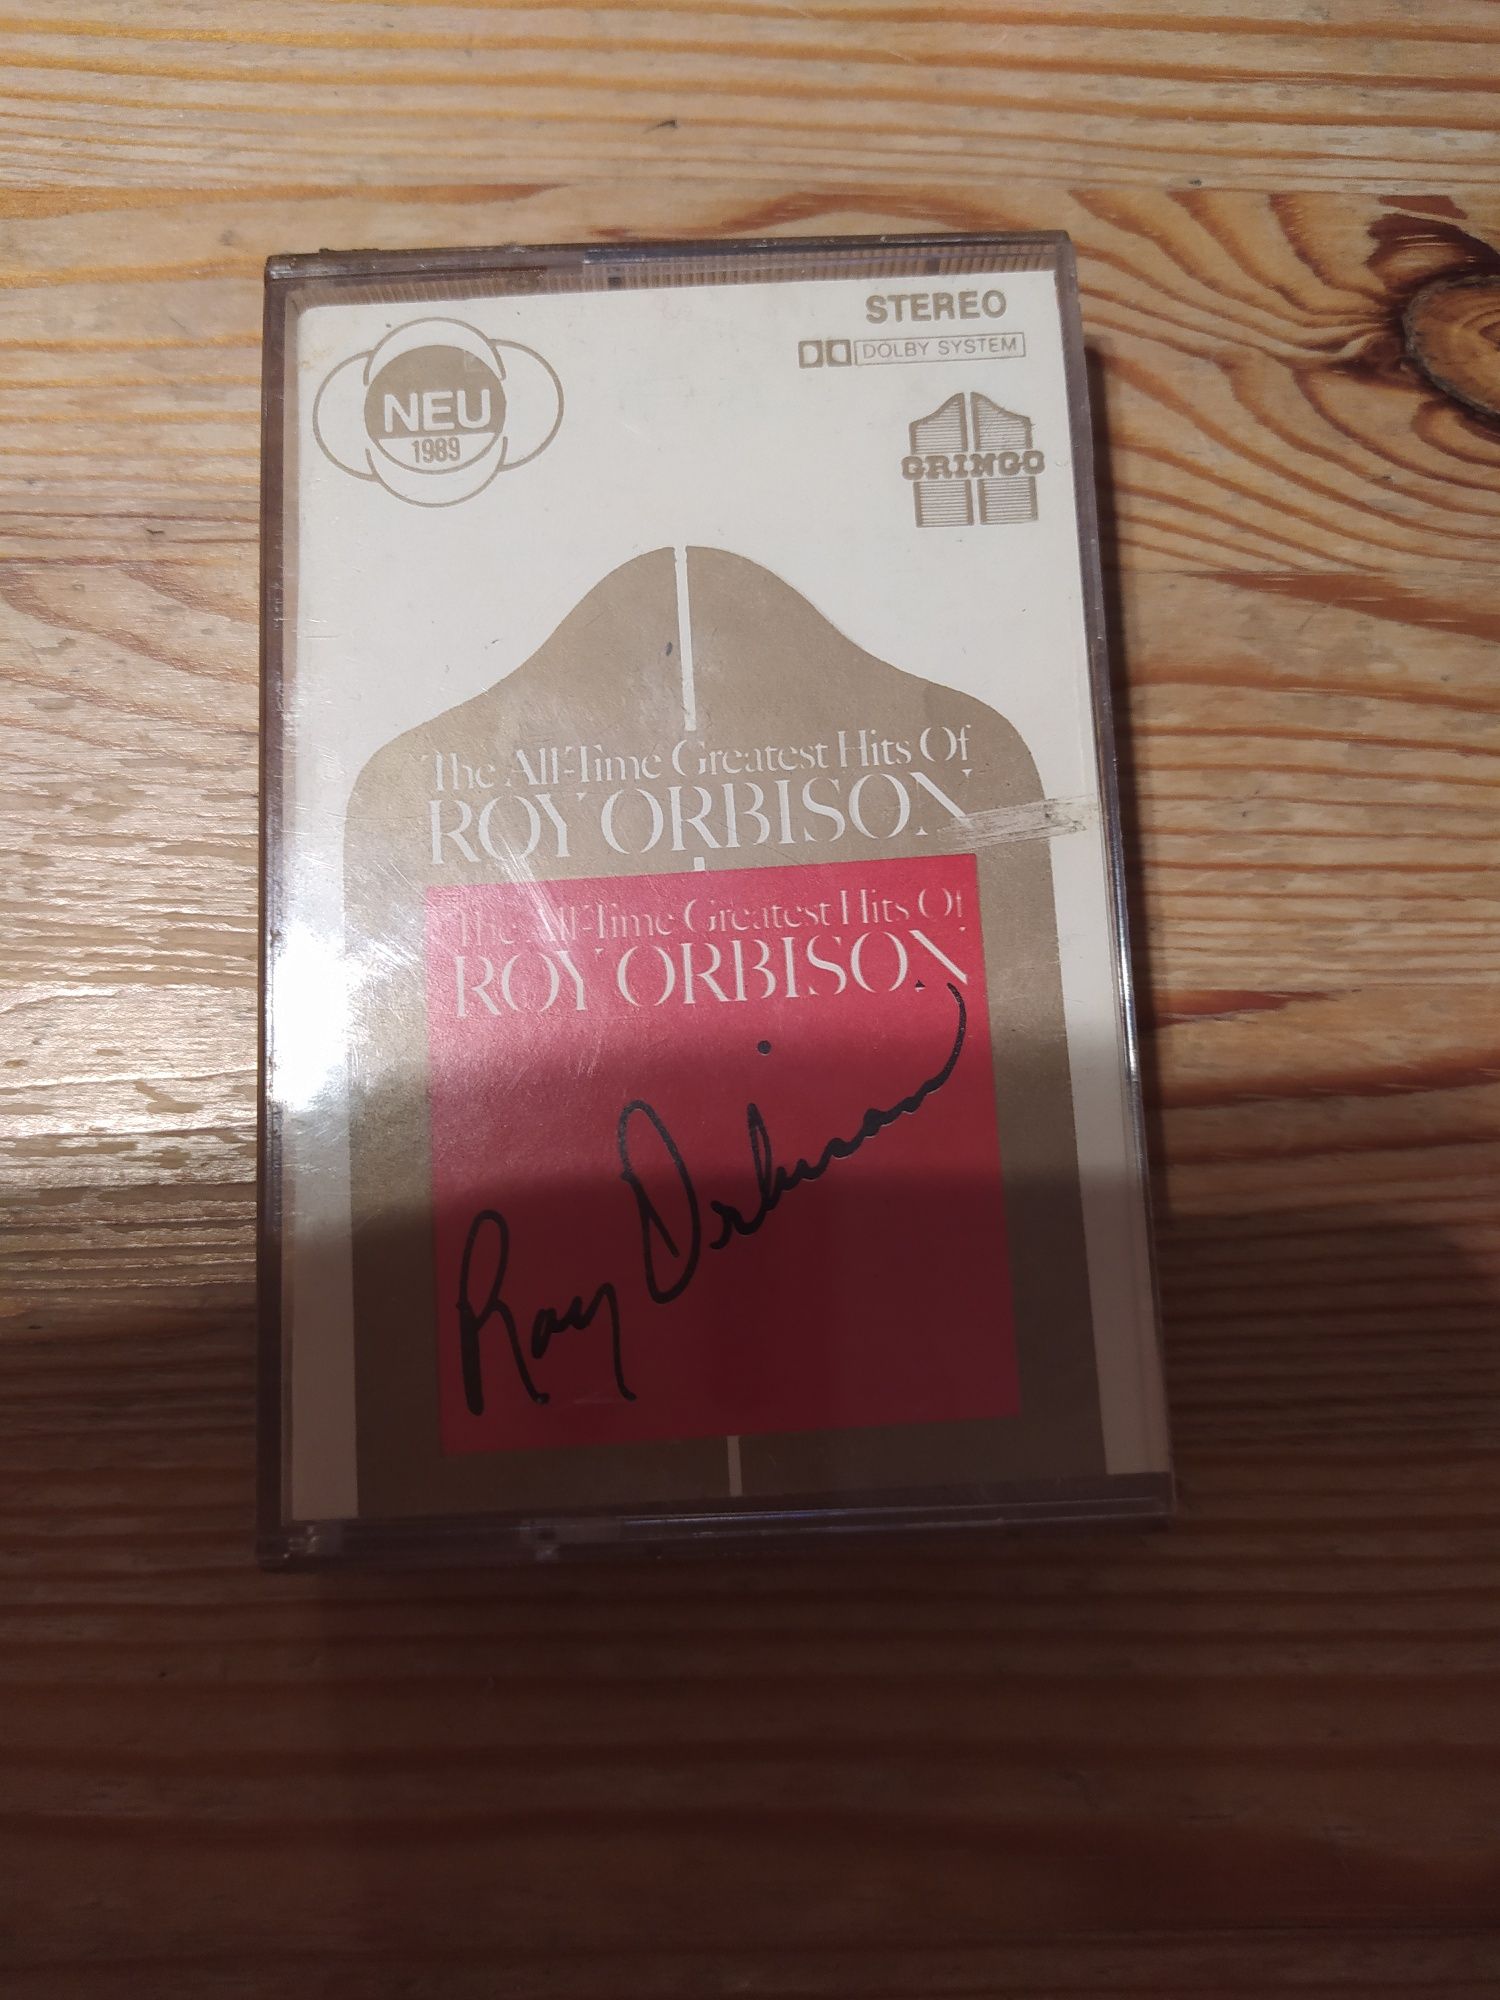 Roy Orbison The All Time Greatest Hits of